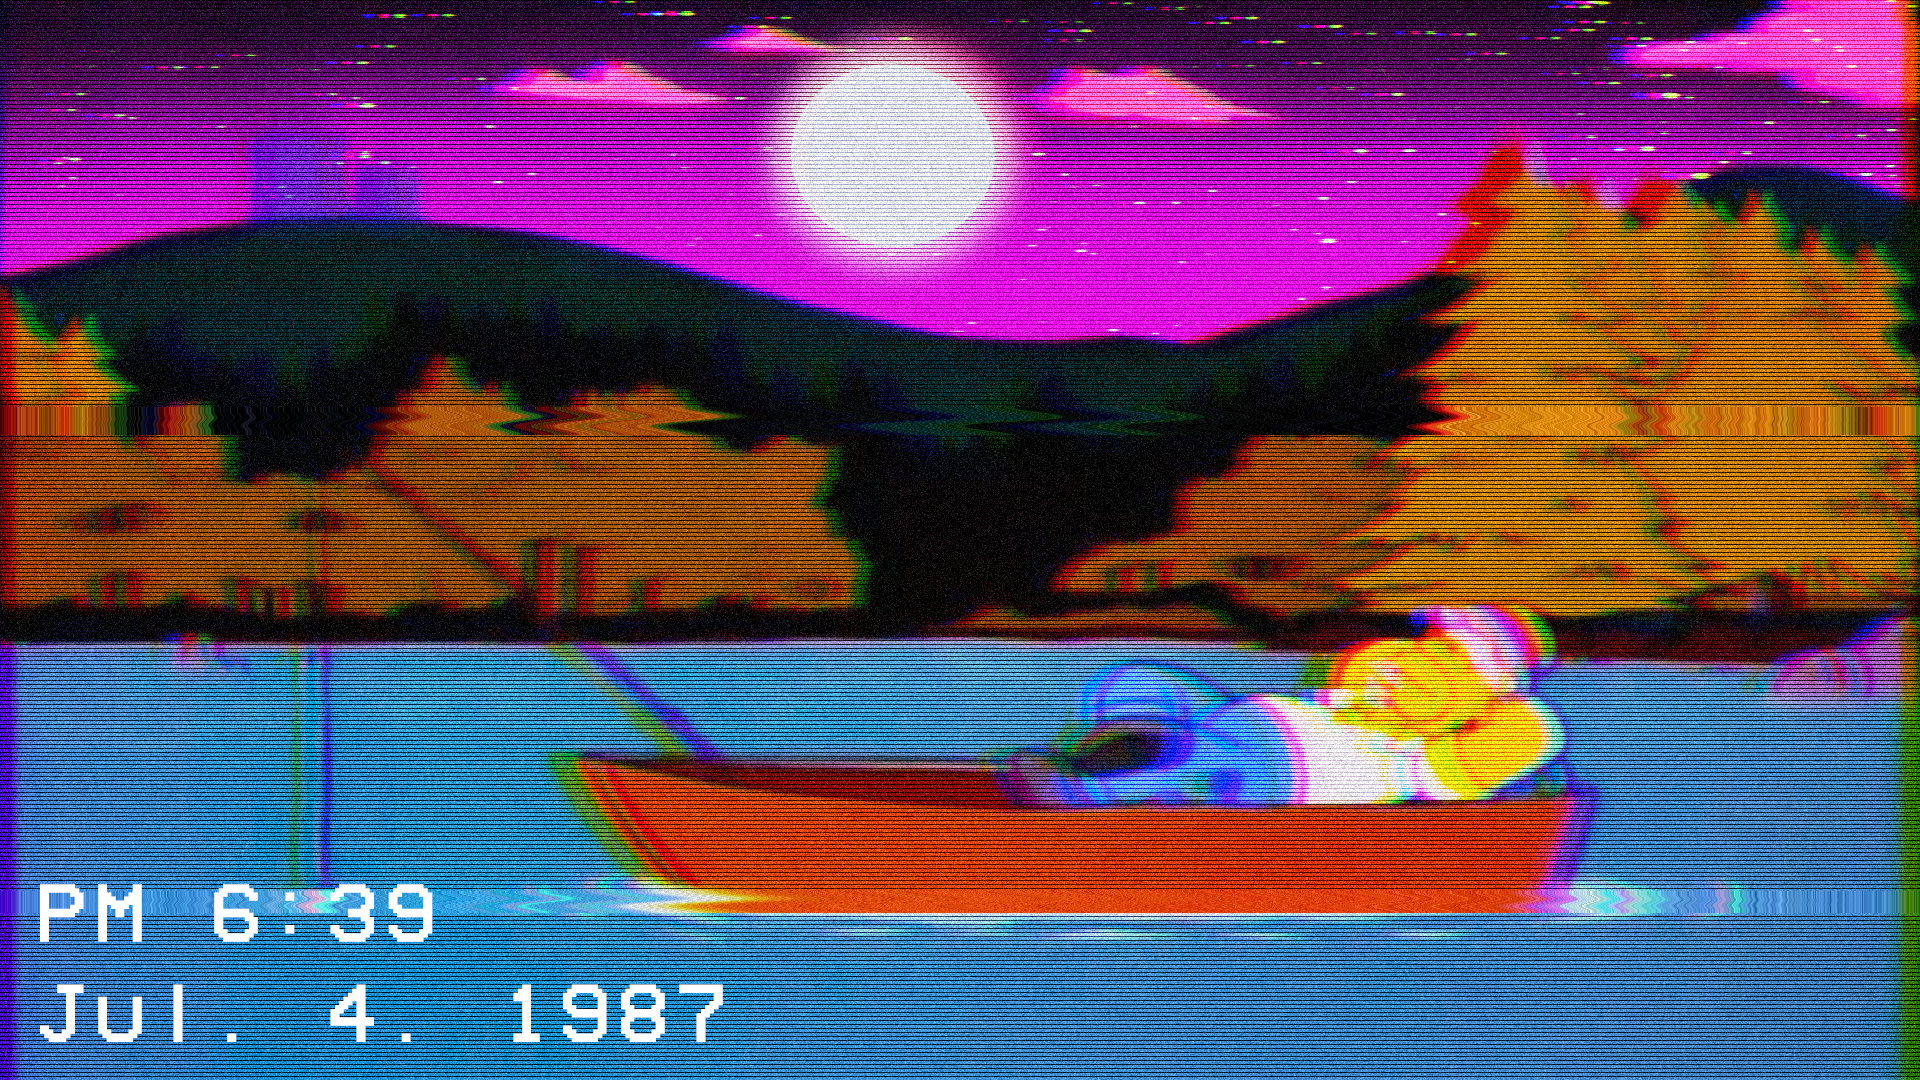 Aesthetic Wallpaper of Homer Simpson relaxing on a lake